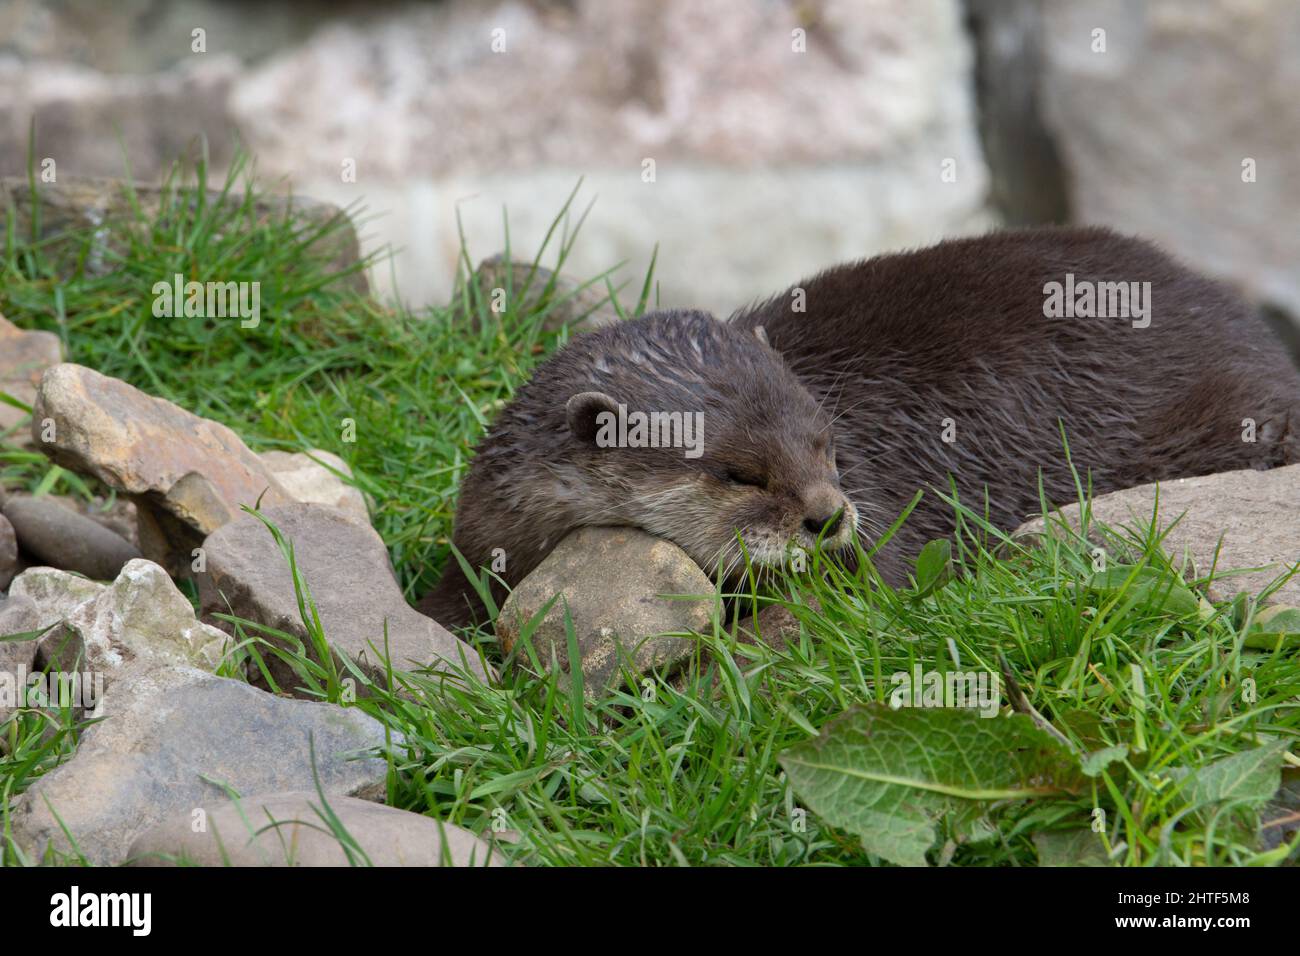 Asian small-clawed otter (Amblonyx cinerea) sleeping with head on a stone with green grass Stock Photo